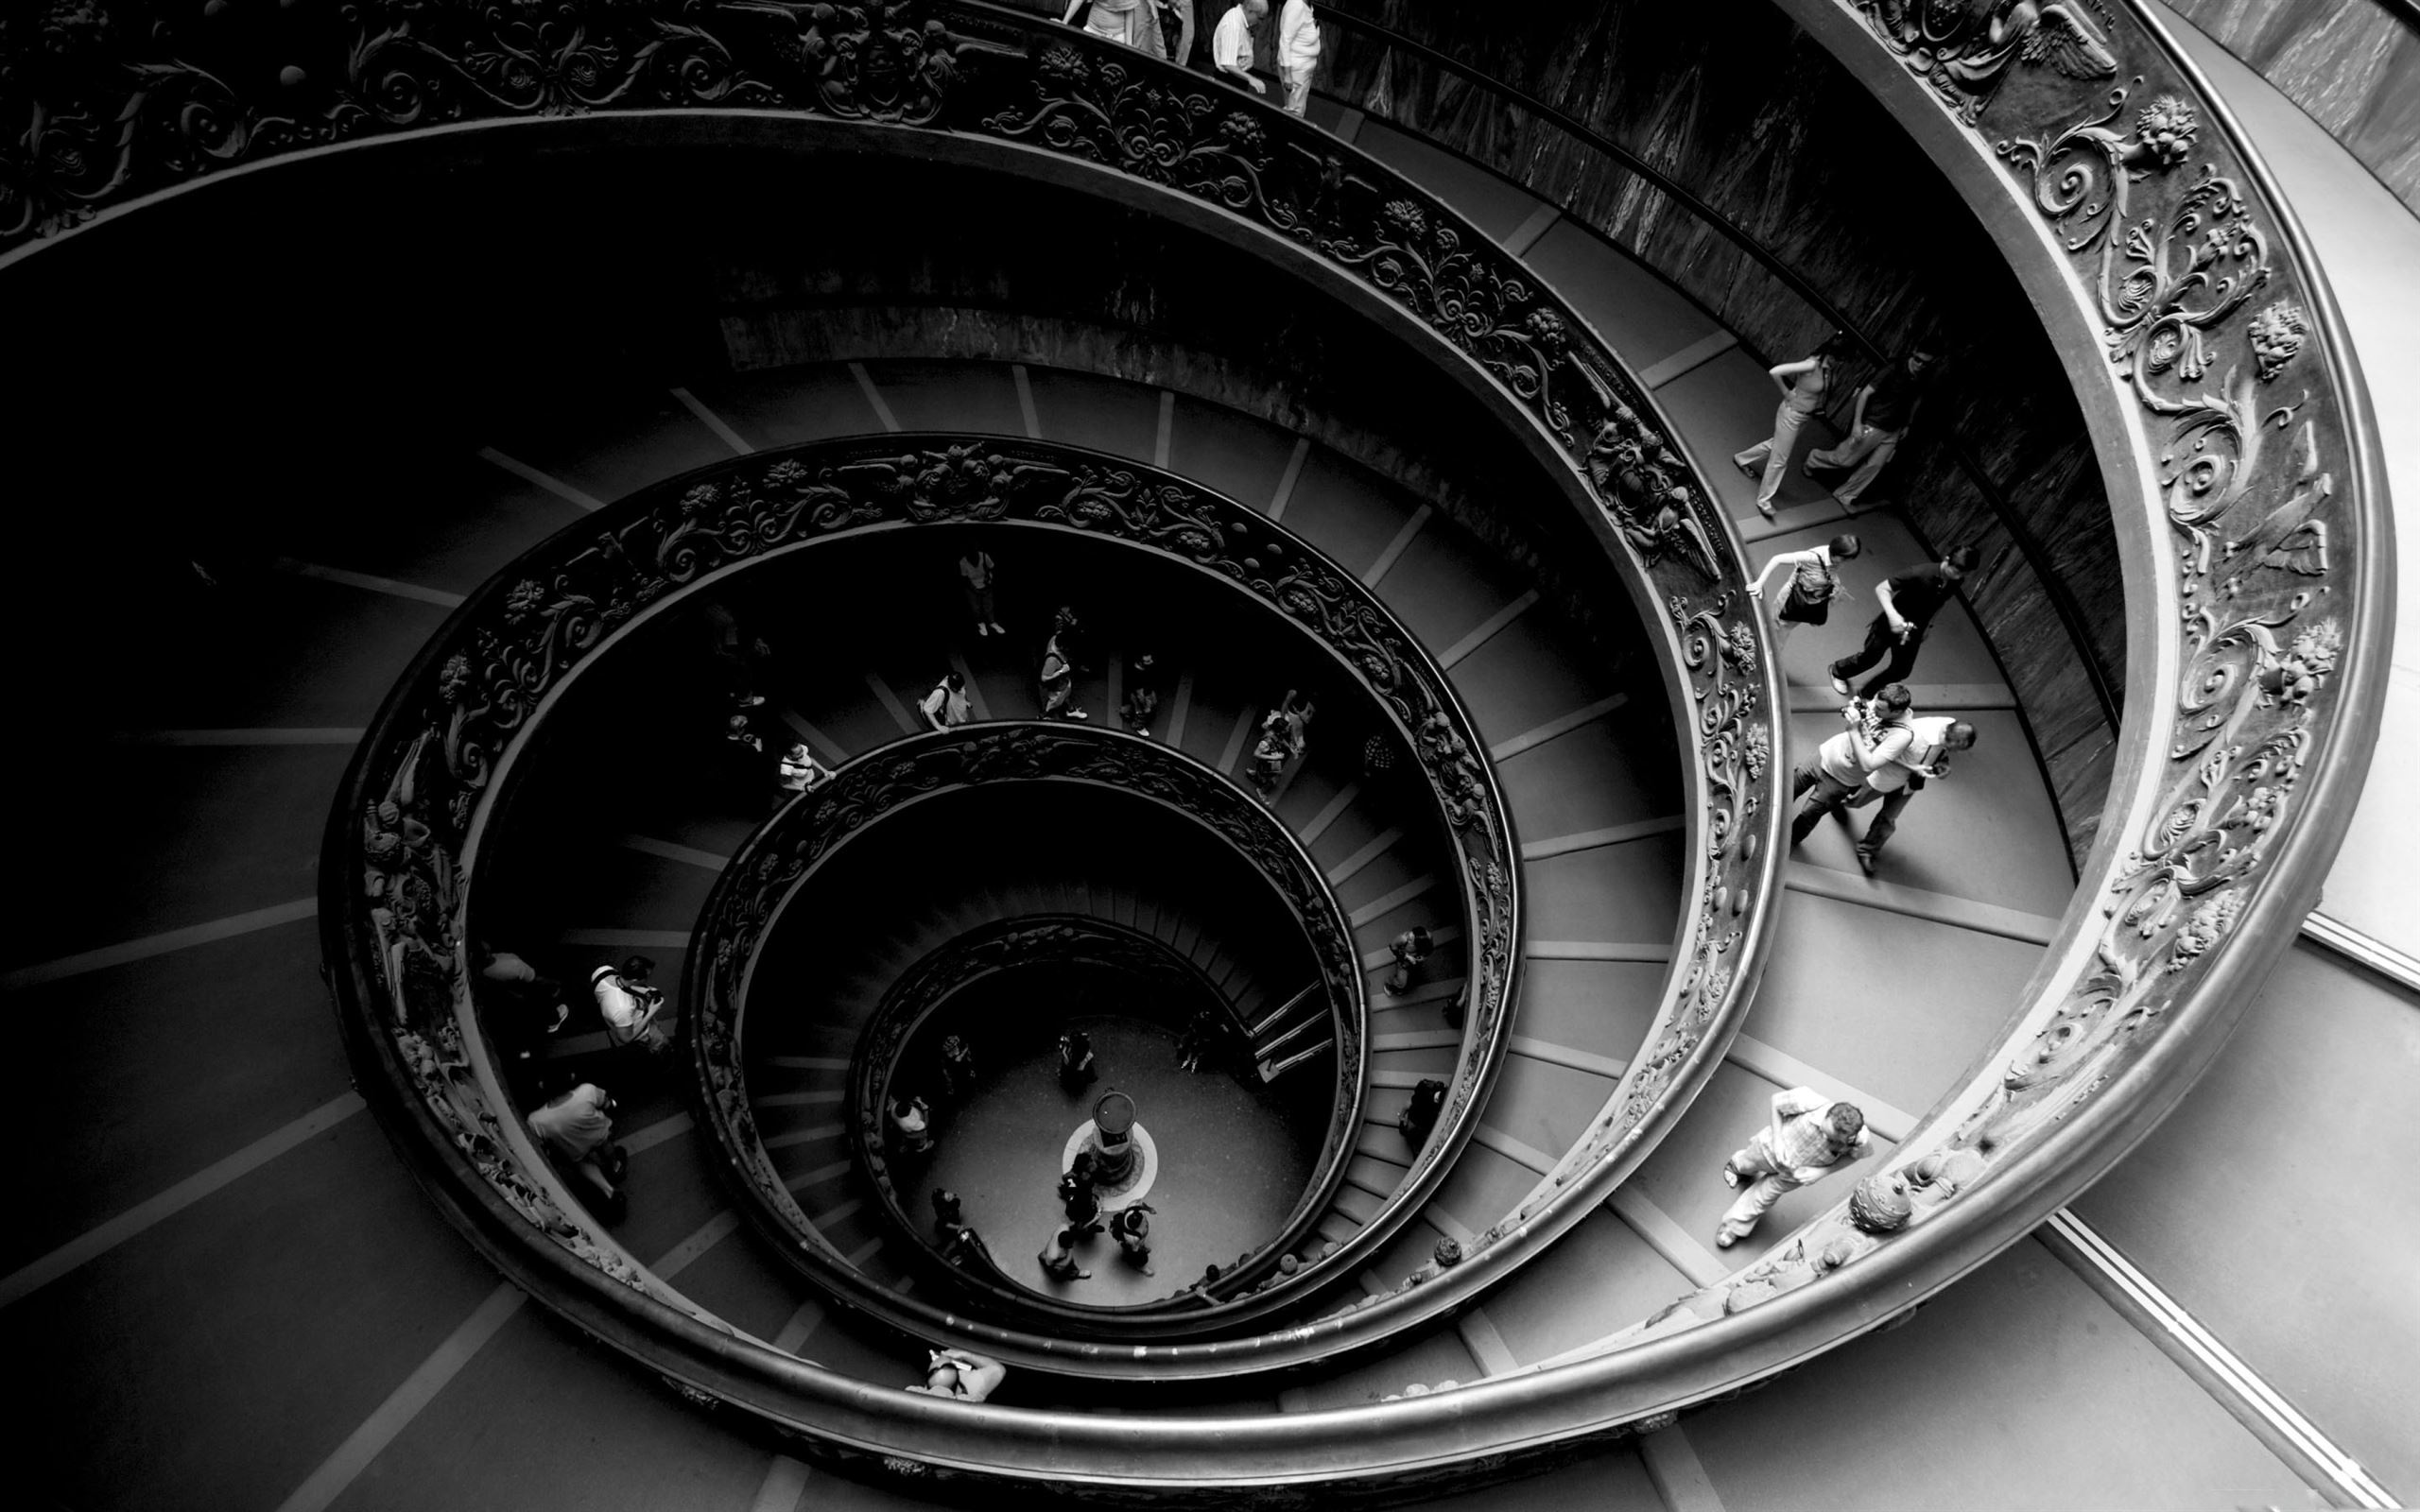 Golden Ratio: Spiral staircase, Architecture, Monochrome, Vatican museum, Symmetry. 2560x1600 HD Background.